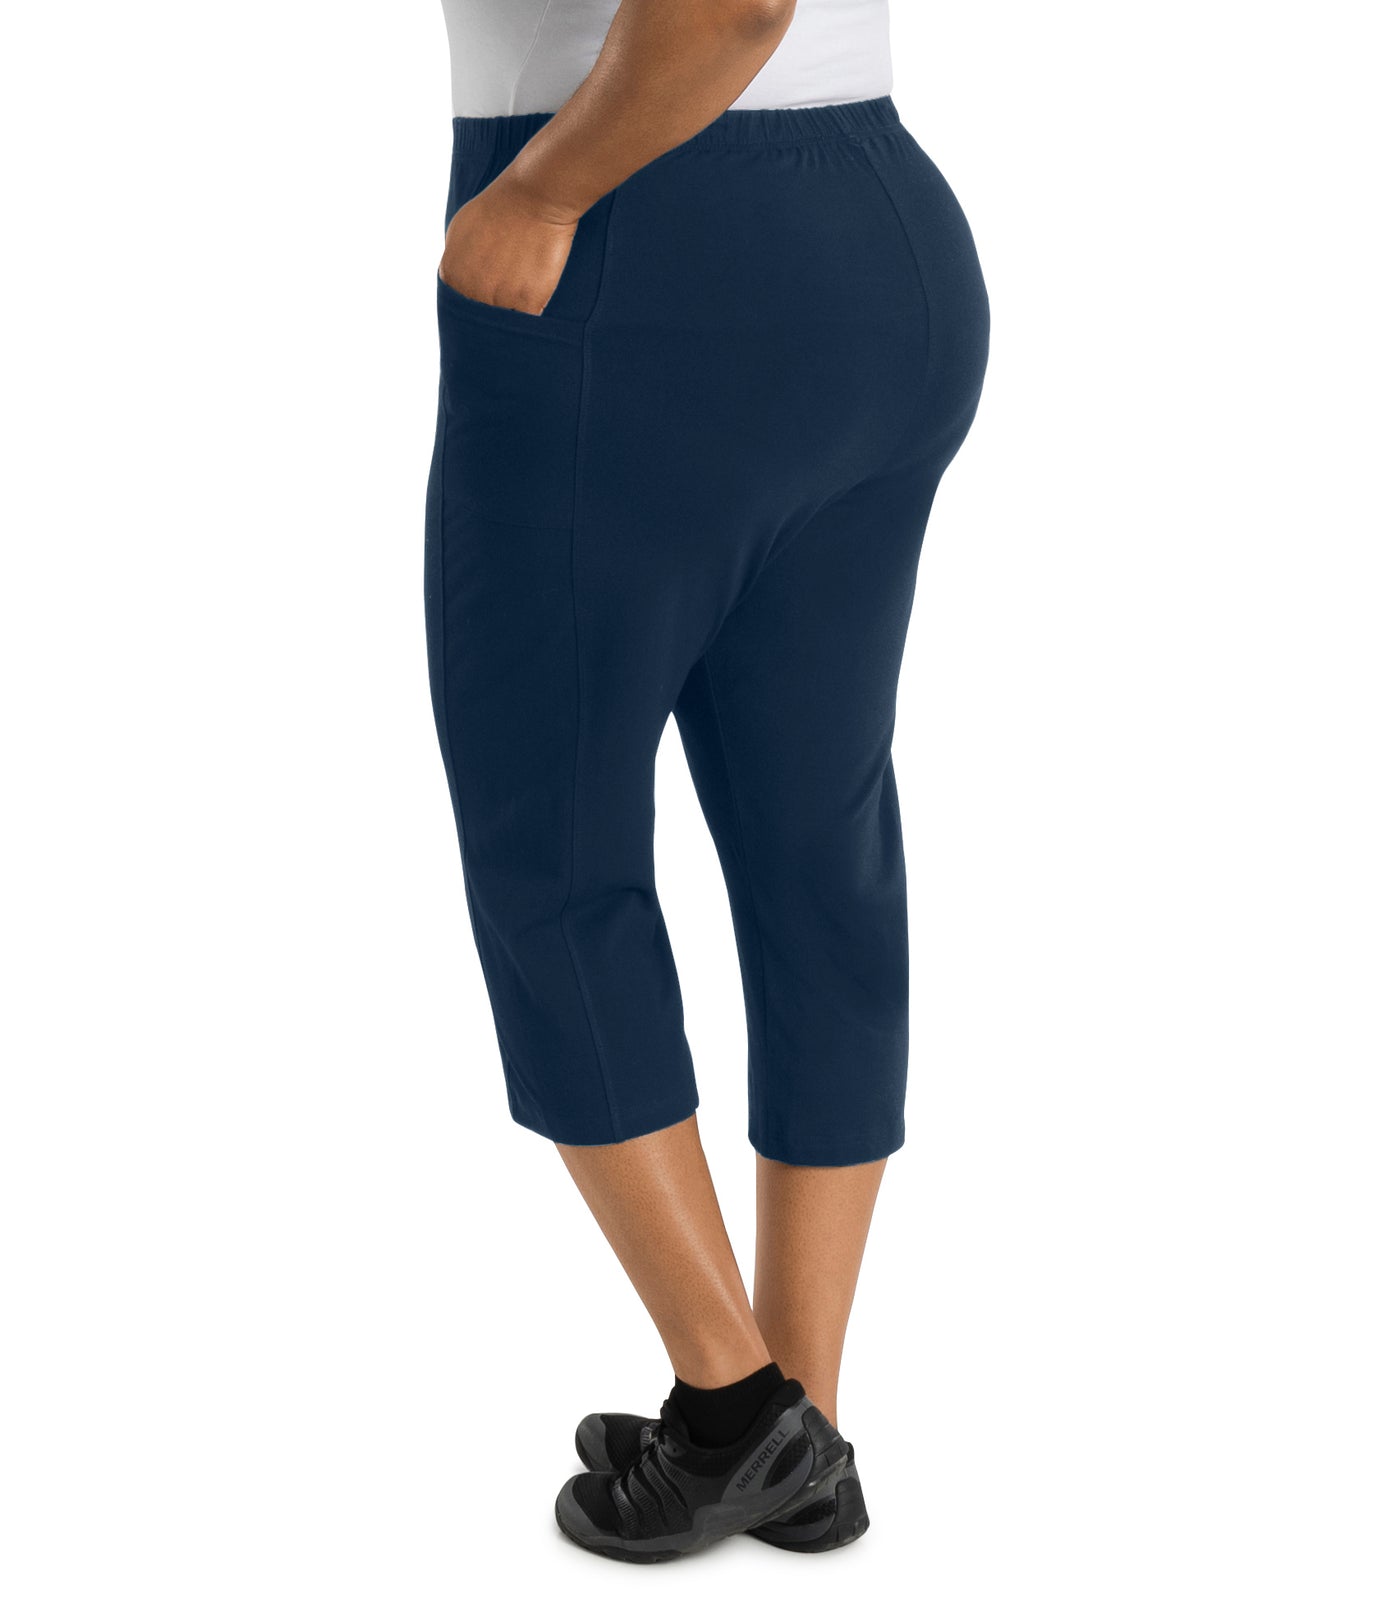 Bottom half of plus size woman facing sideways left hand in pocket, wearing JunoActive Stretch Naturals side pocket capri pant bottom. The hemline comes to mid-calf and hugs the body without being skin tight. Color is indigo.